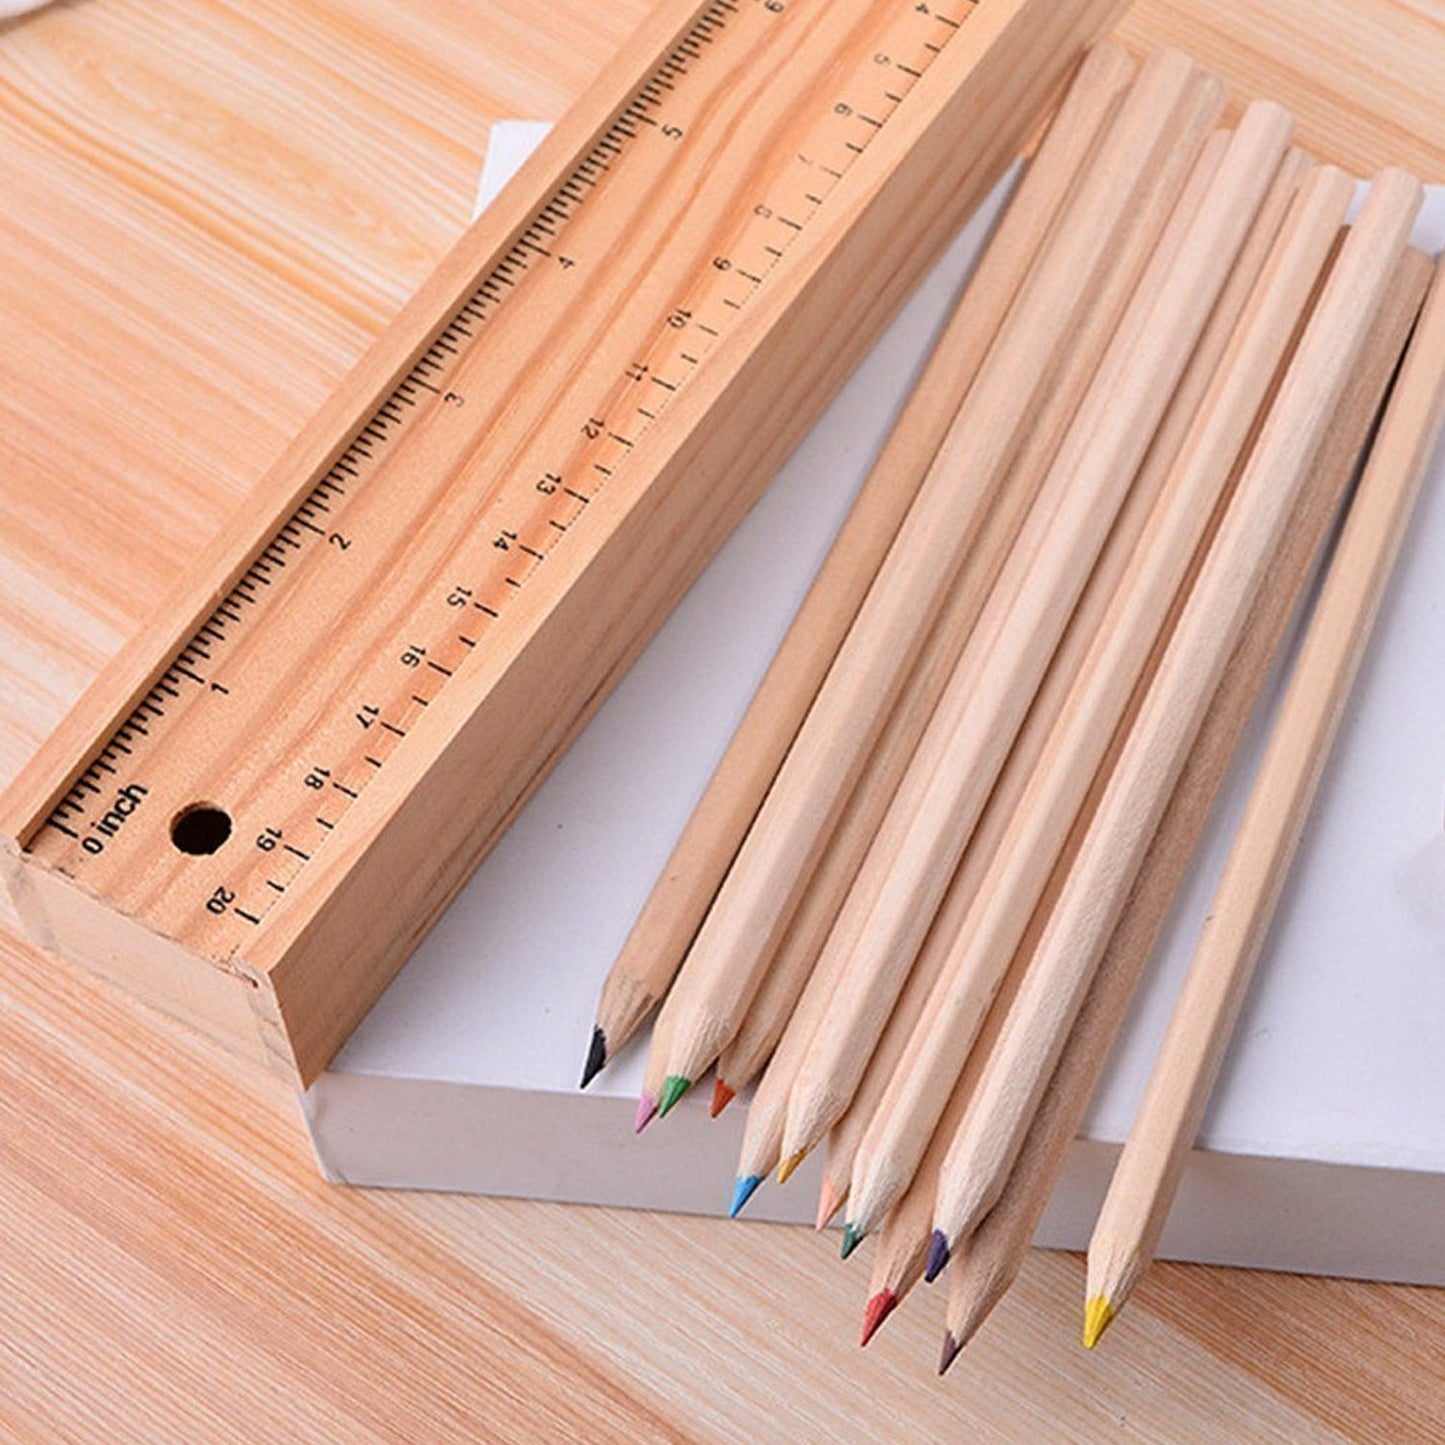 Colorful Wooden Pencil Set with Pencil box, Ruler, Sharpener For for Kids, Artist, Architect